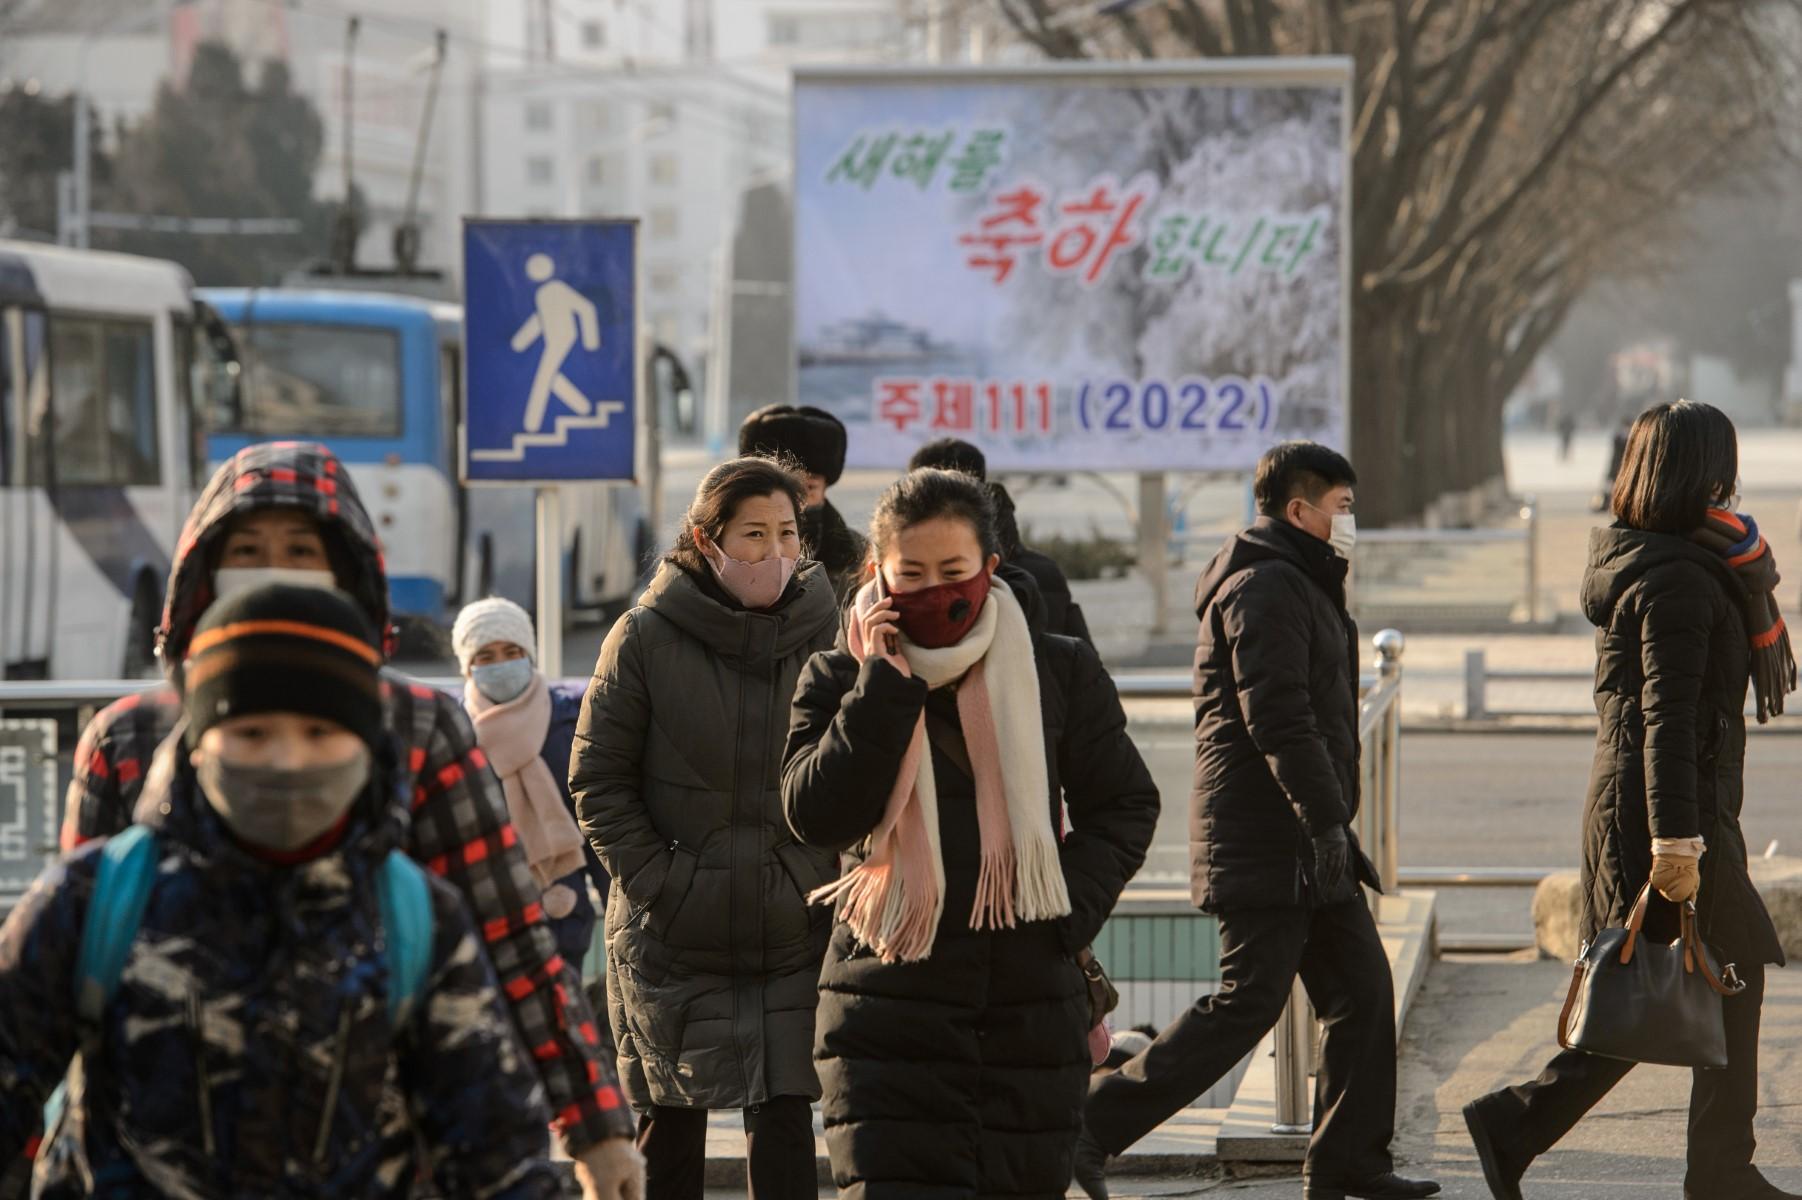 Pedestrians walk on a street in Pyongyang on Jan 1. A new report says researchers have identified US$170 million in old, unlaundered cryptocurrency holdings from 49 separate hacks spanning from 2017 to 2021. Photo: AFP